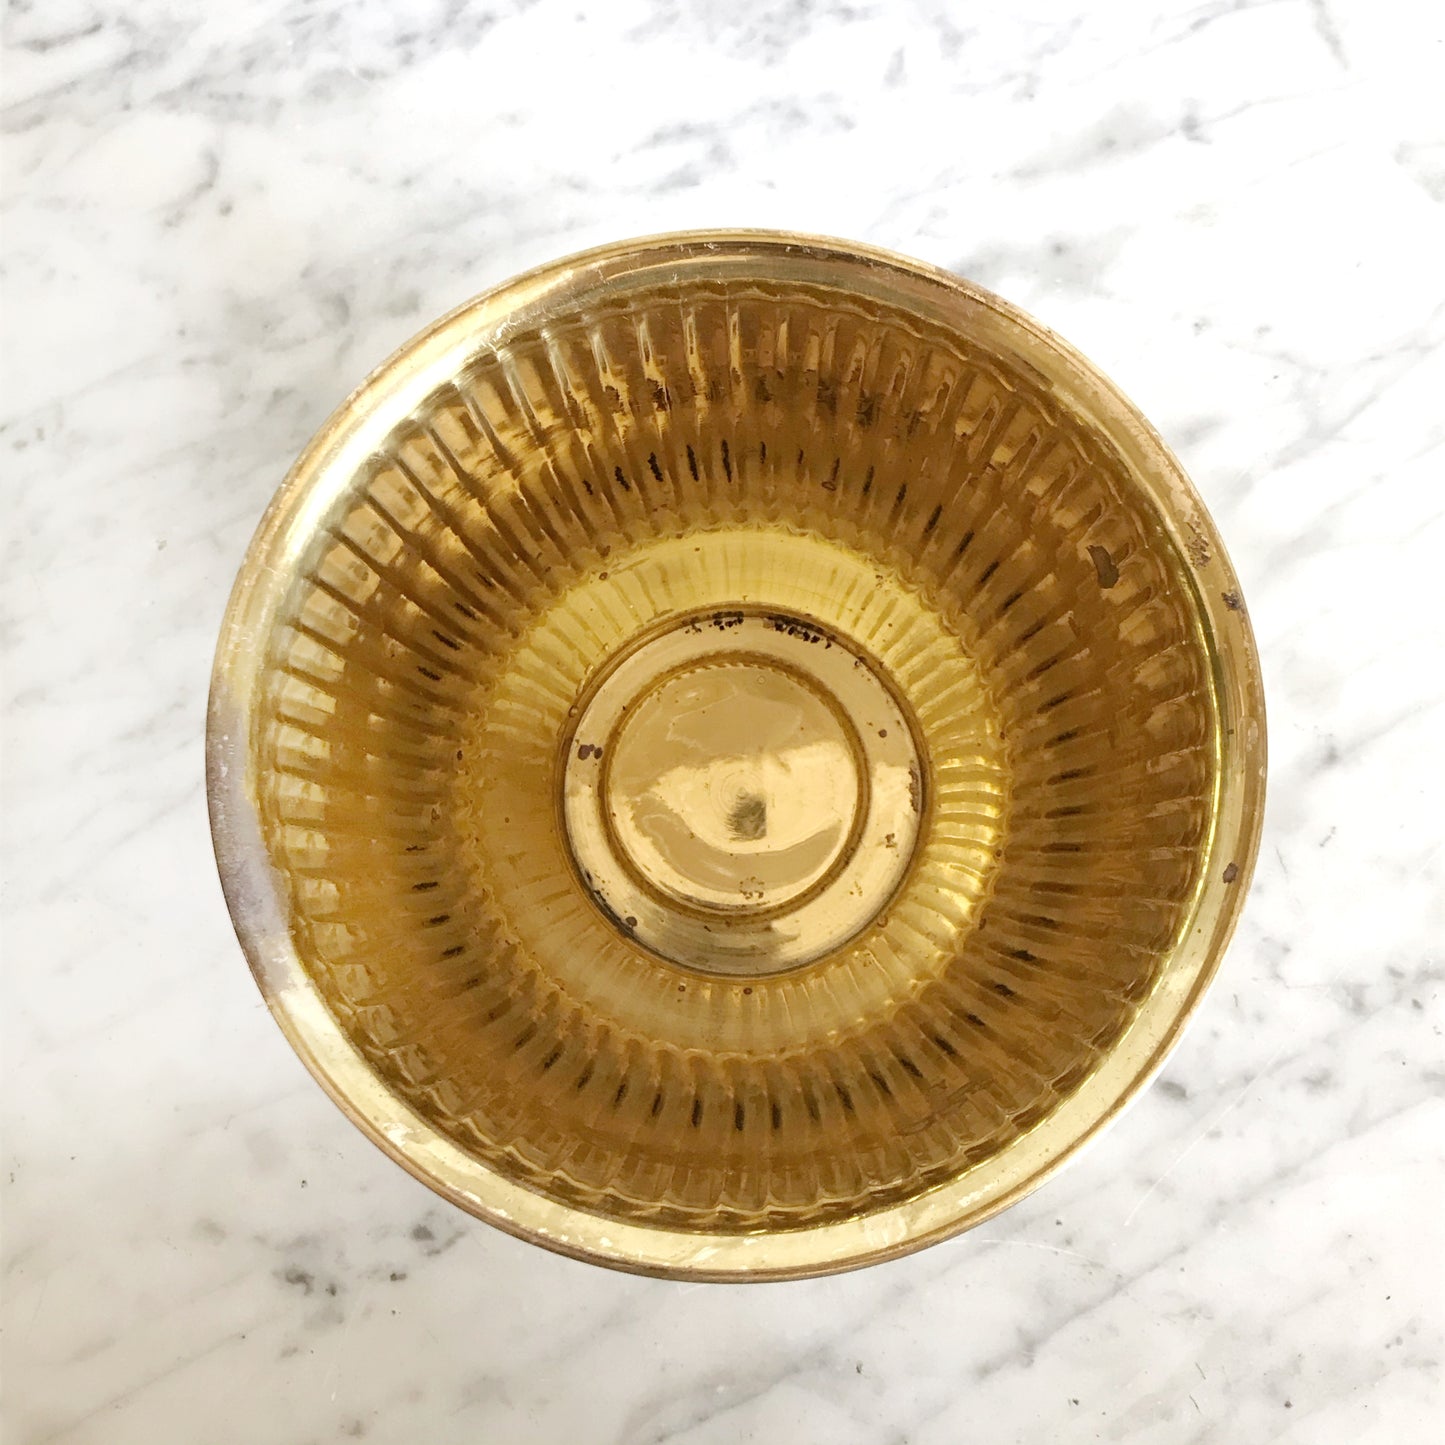 Small Vintage Ribbed Brass Planter